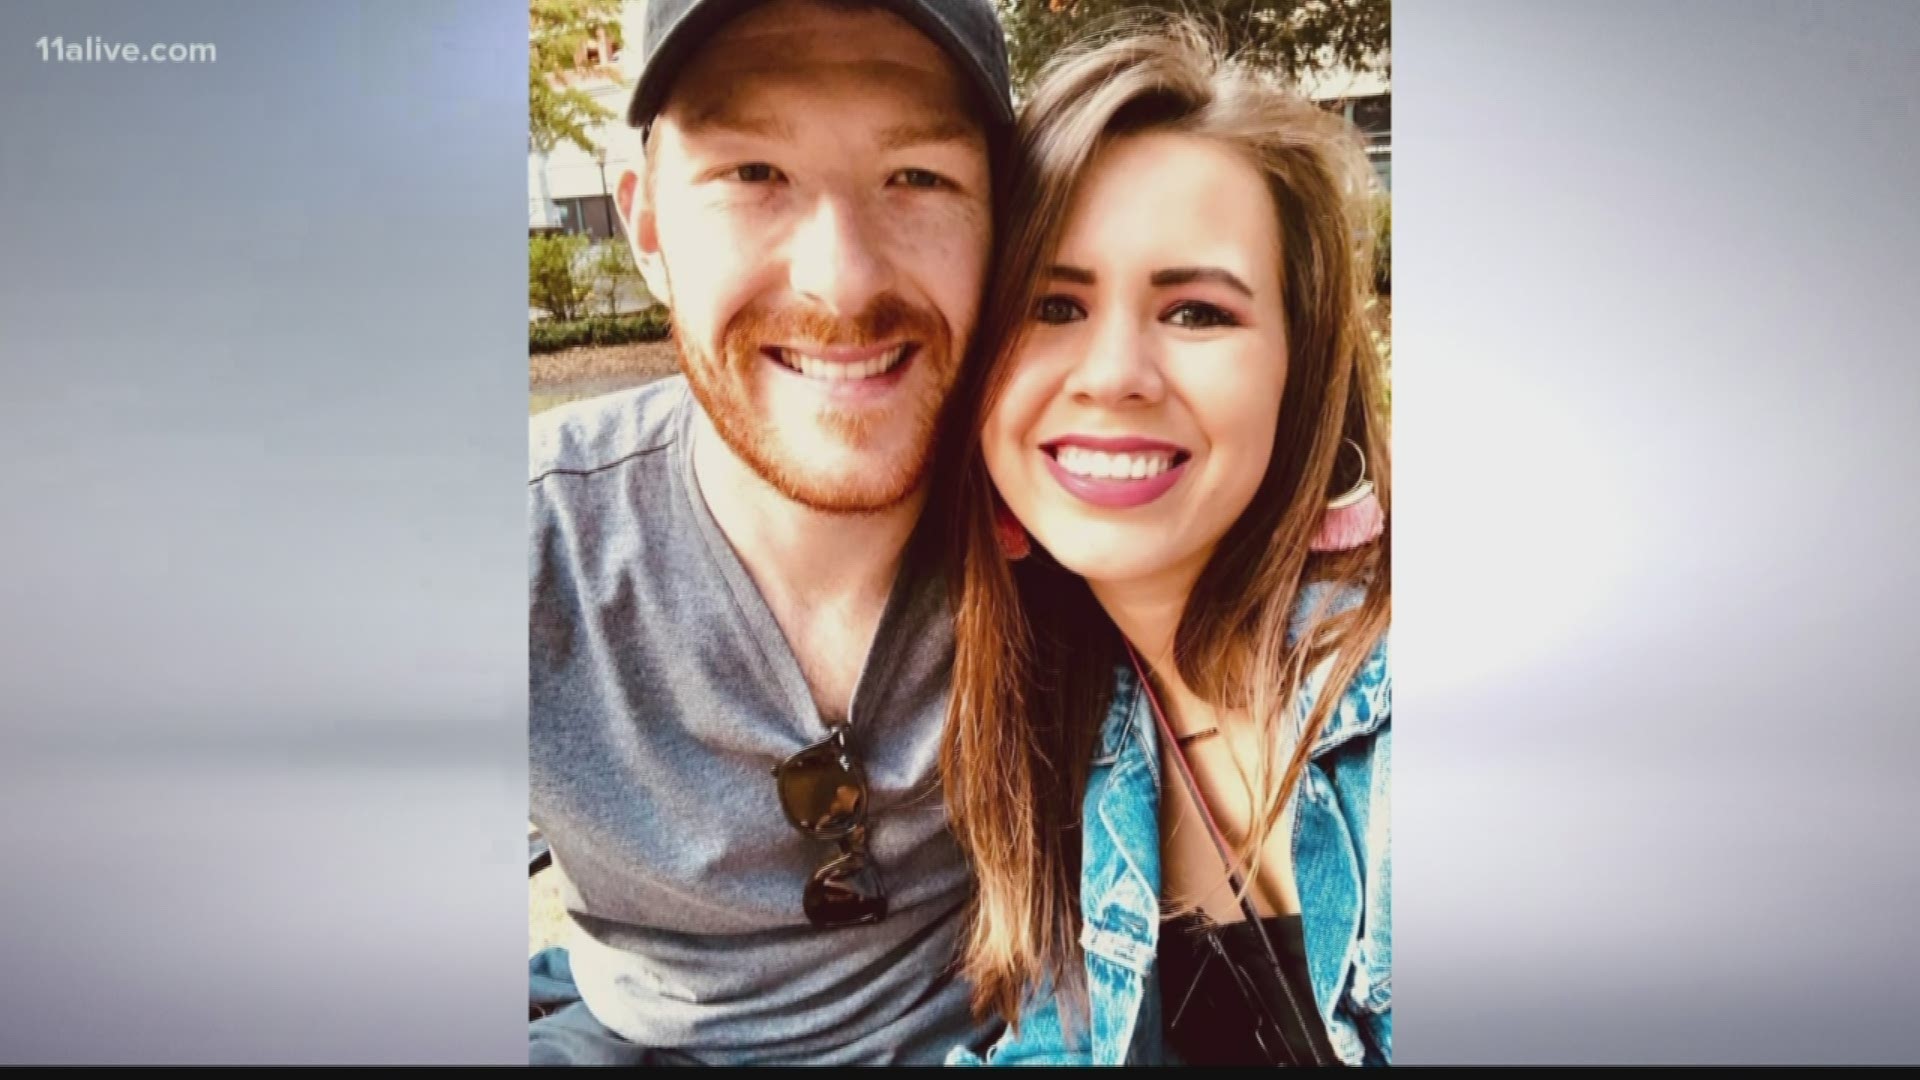 Savannah Sims, 23, was aboard a Cessna Citation private jet with her boyfriend, Morgen Smith, 25, when it went down in Gordon County.